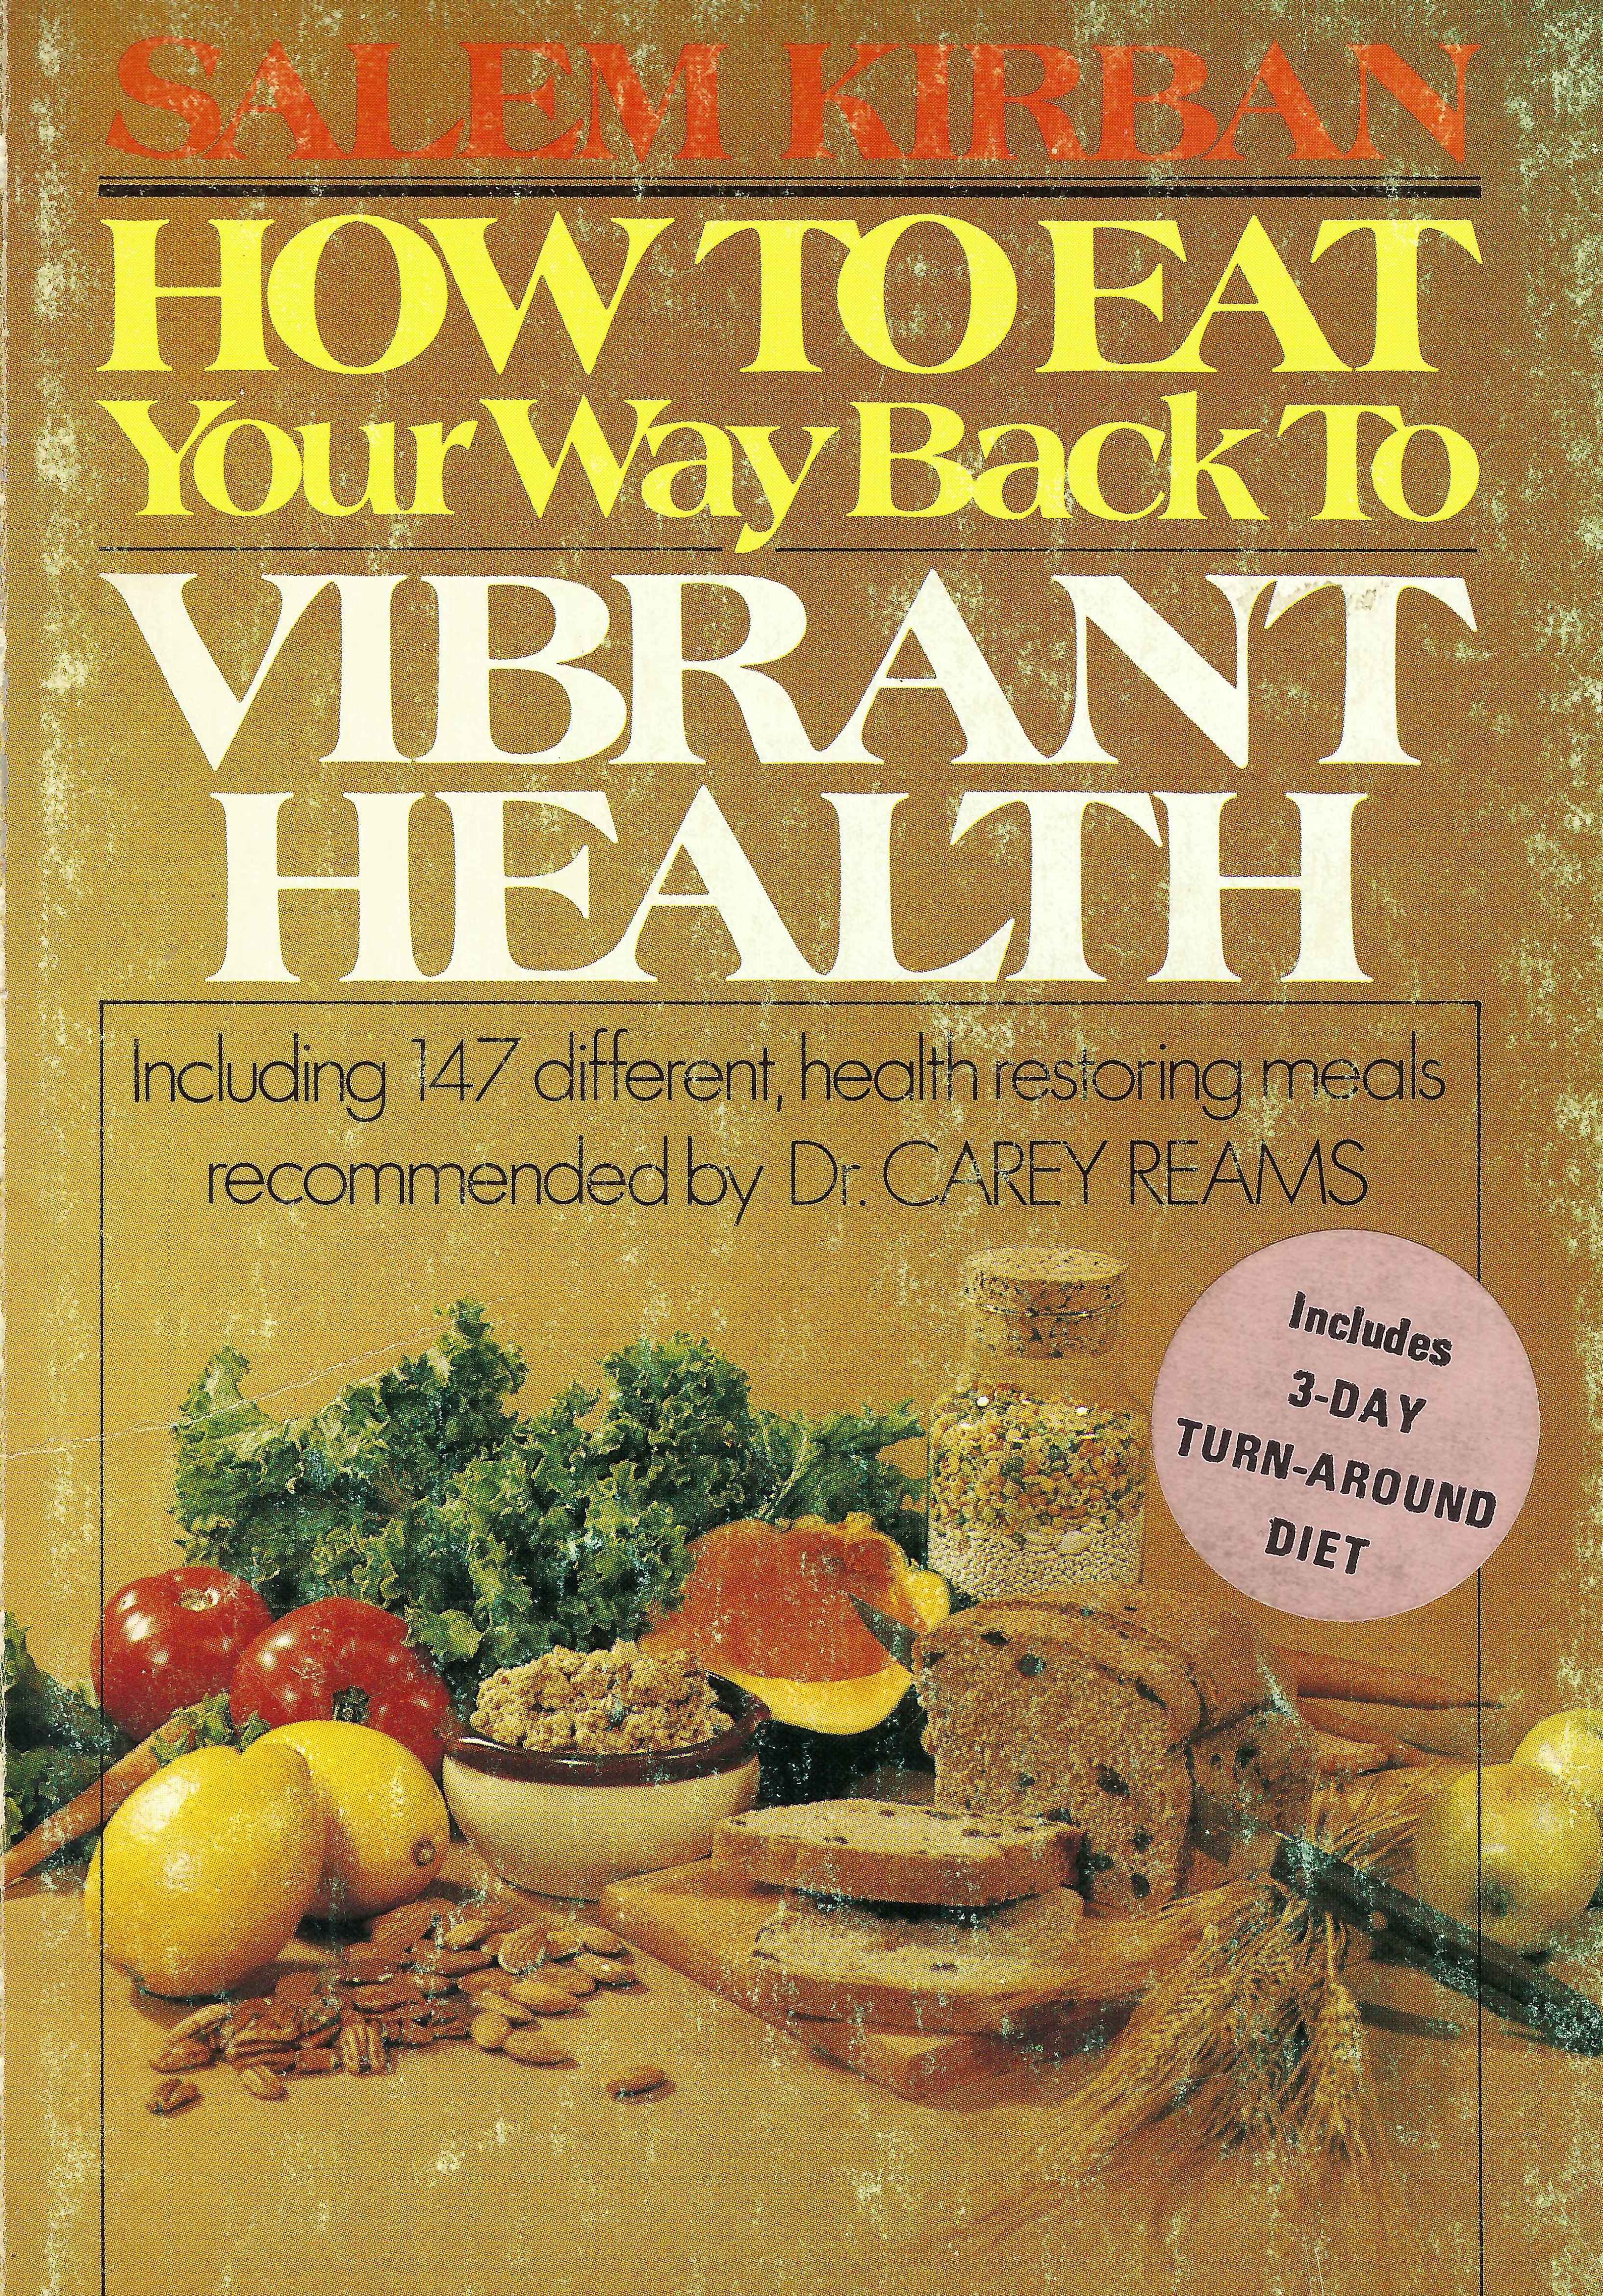 How To Eat Your Way Back to Vibrant Health